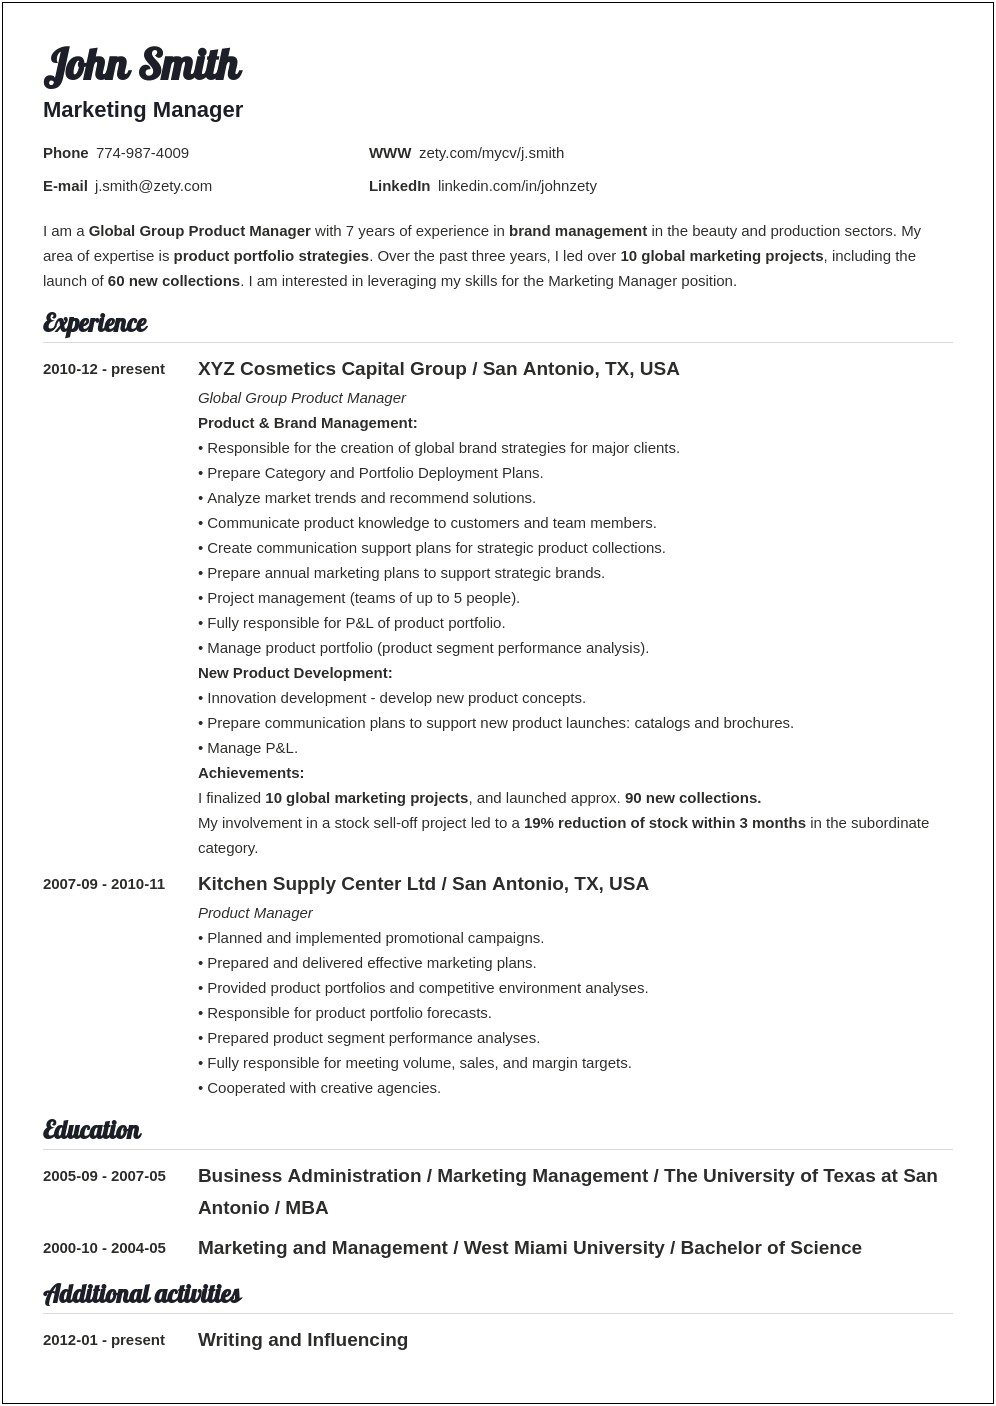 Sample Resume With Education Details